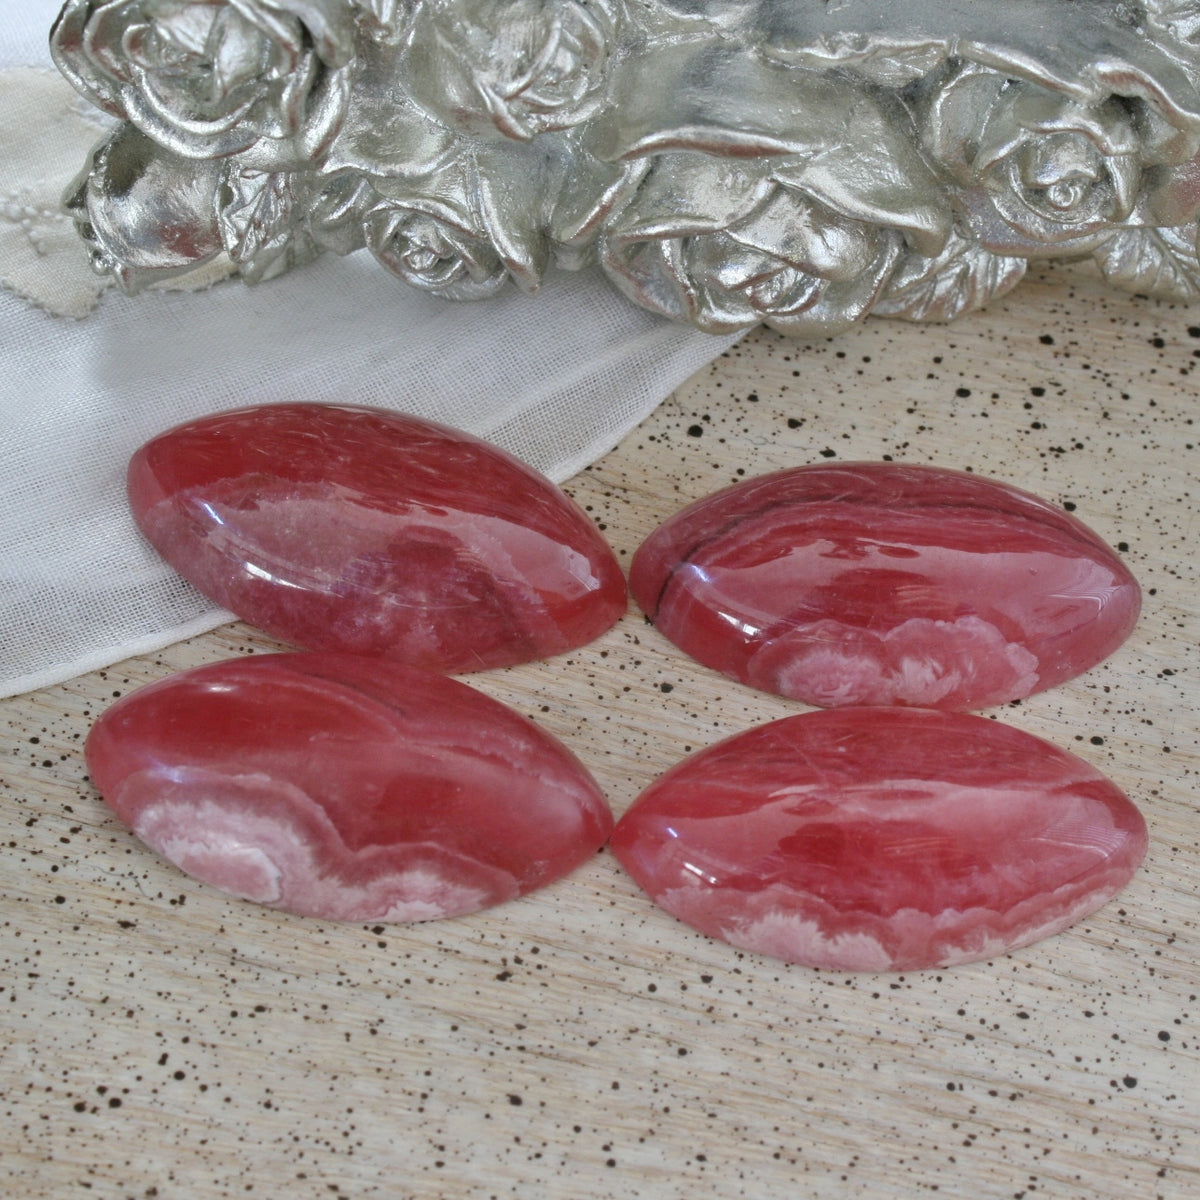 ONE Rhodochrosite Gemmy Marquise Cabochons from Argentina, 51 to 53 ct. each